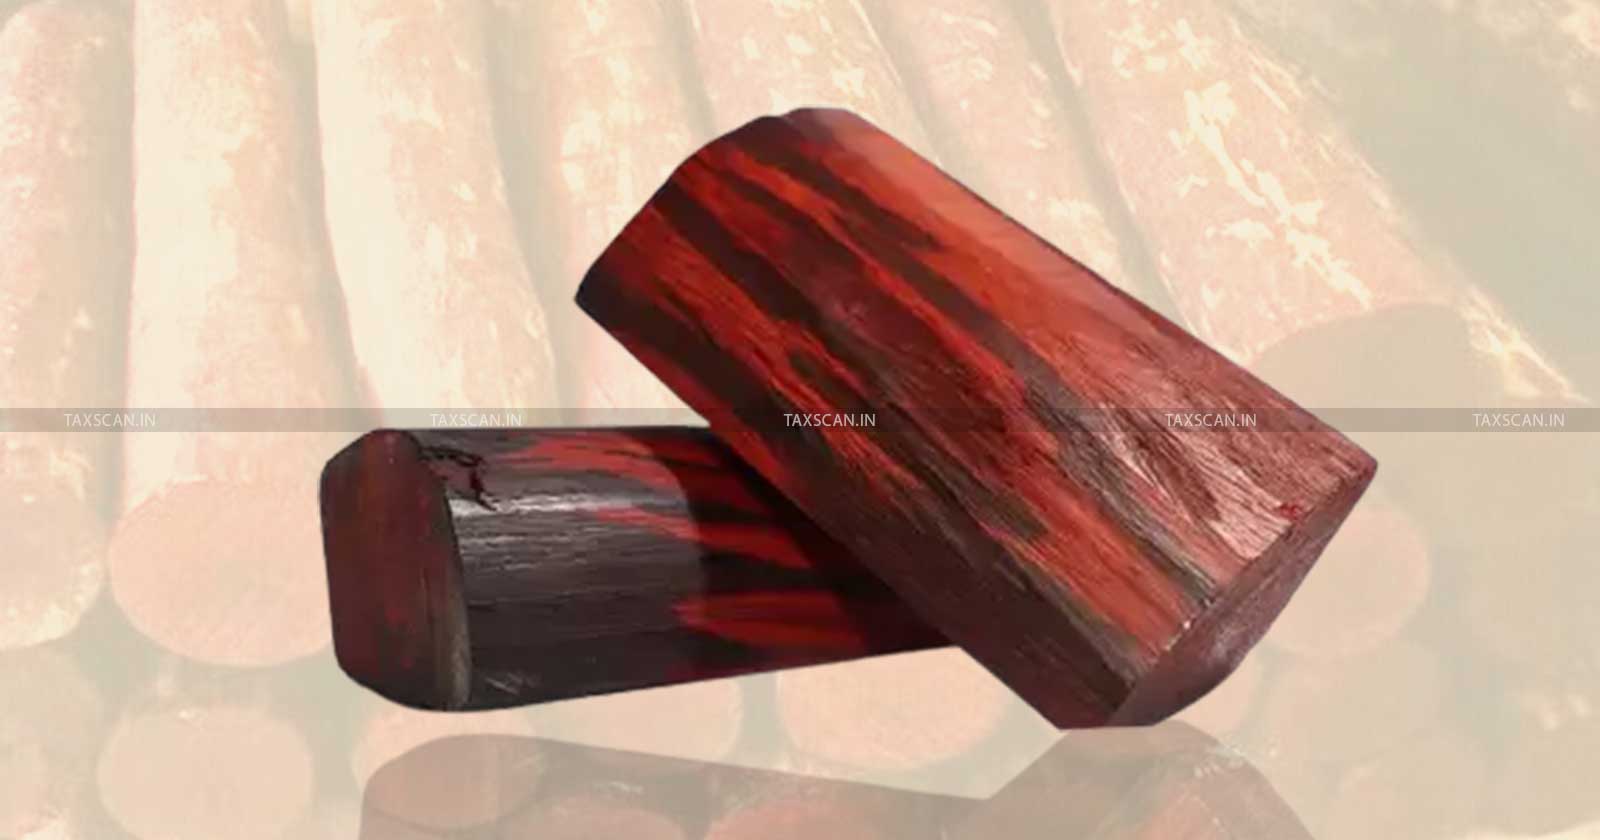 DGFT notifies amendment in Export Policy of Red Sanders wood - DGFT notifies amendment - Private Land - amendment in Export Policy of Red Sanders wood - Red Sanders wood - Pattaland - Confiscated Source - taxscan